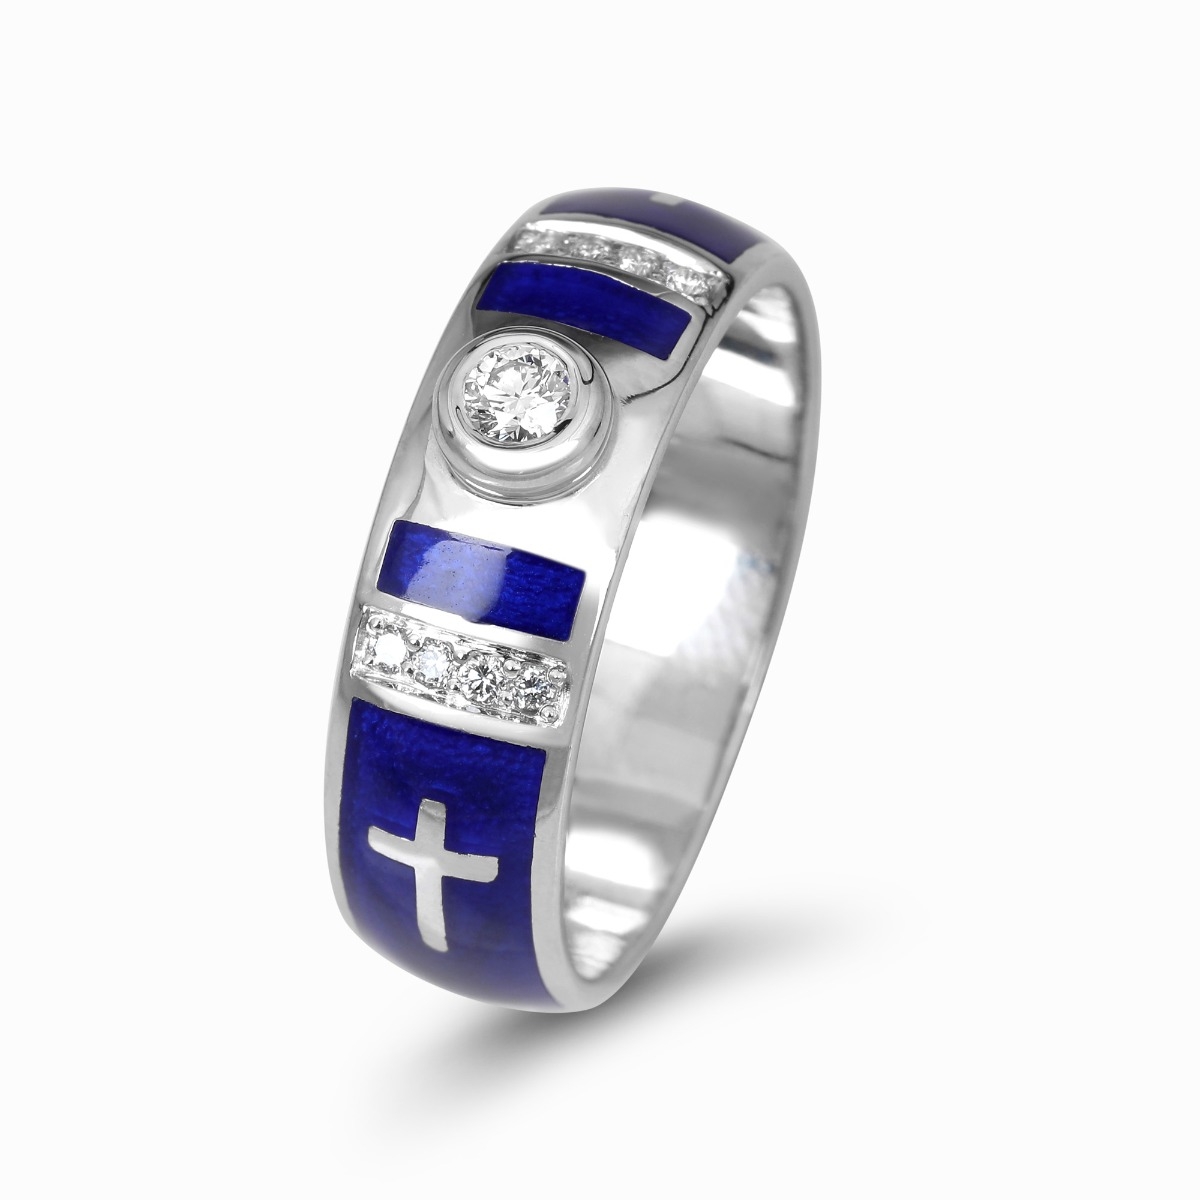 Anbinder 14K White Gold and Blue Enamel Wedding Ring with Latin Cross Design and 9 Diamond Accents - 1